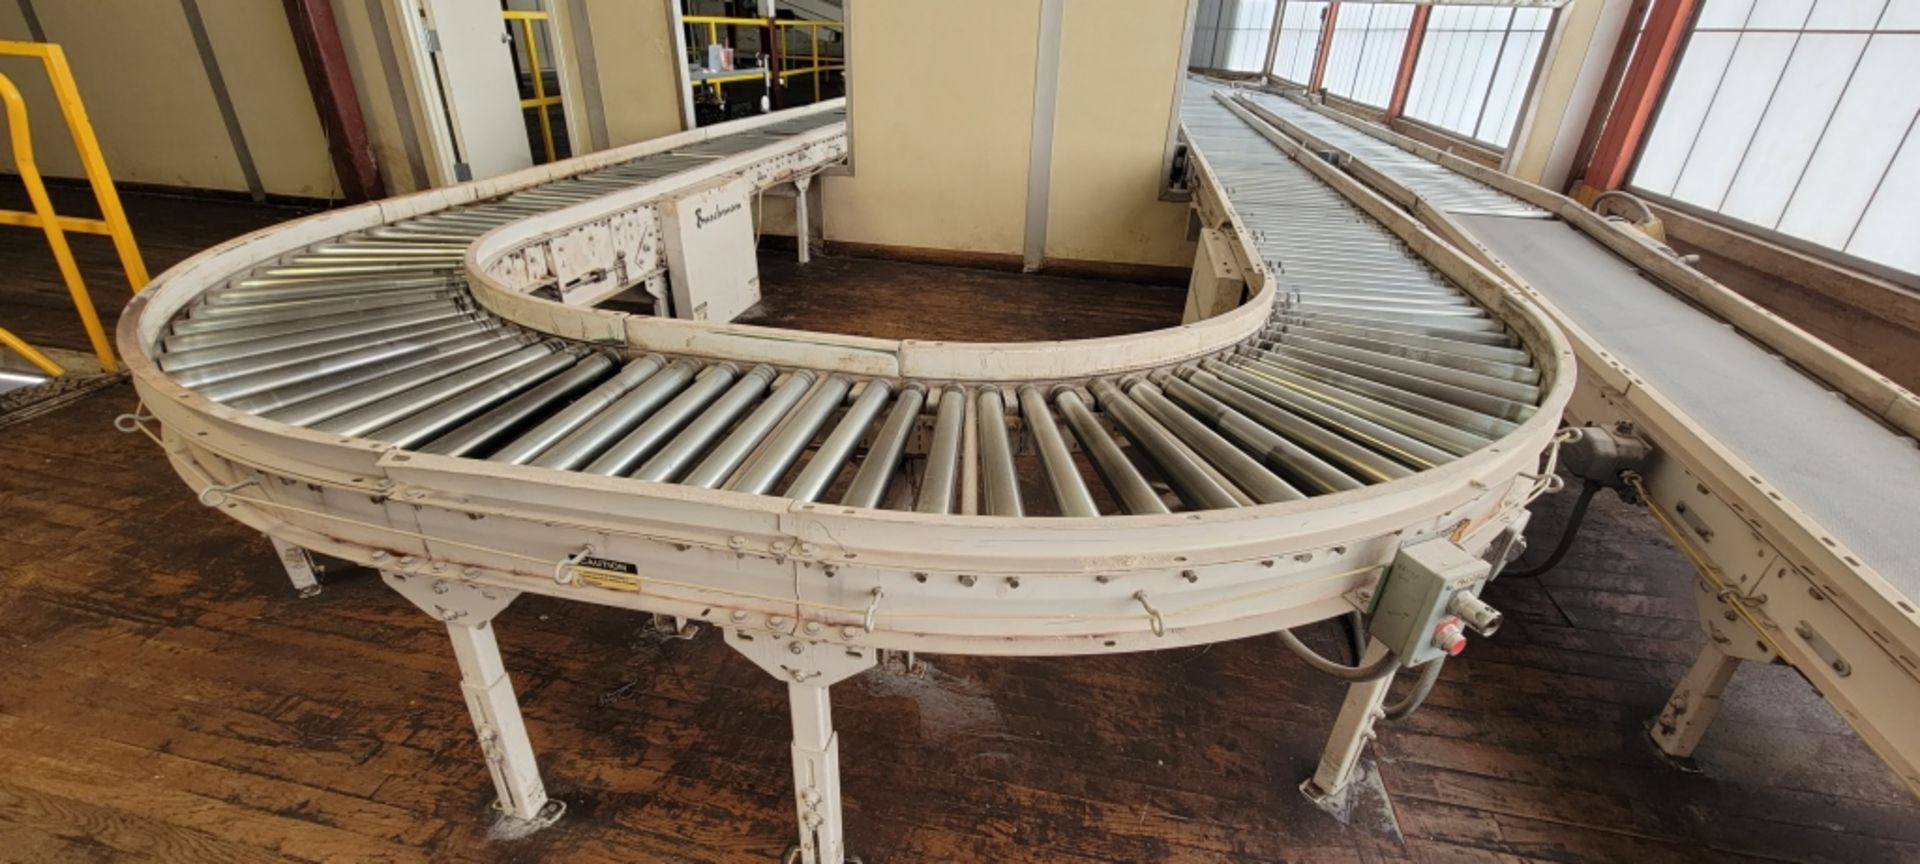 Buschman Inclined Conveyor System - BULK BID FOR LOTS 1118 TO 1125 - Image 8 of 12